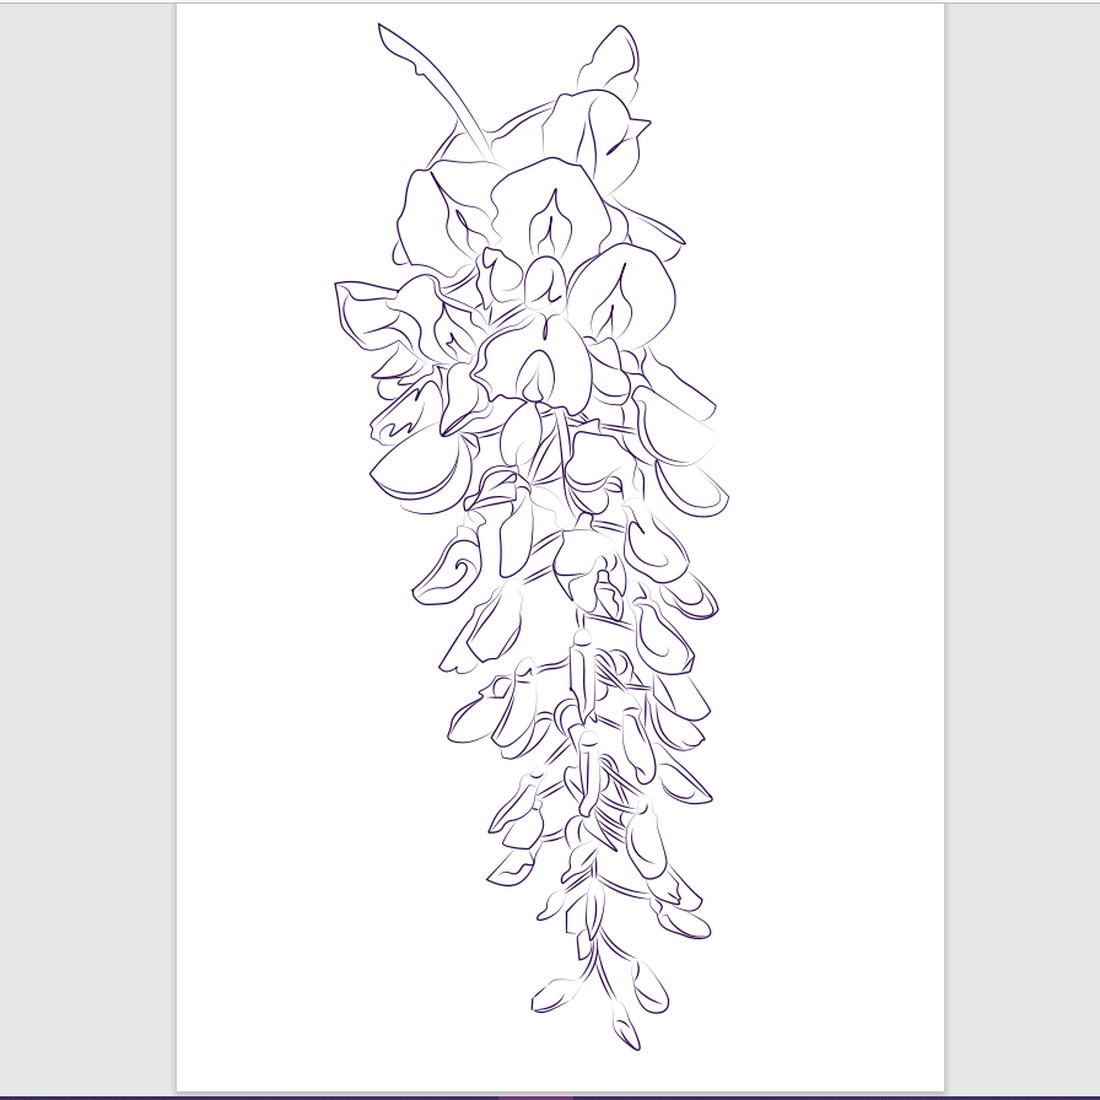 Wisteria Illustration for your designs.